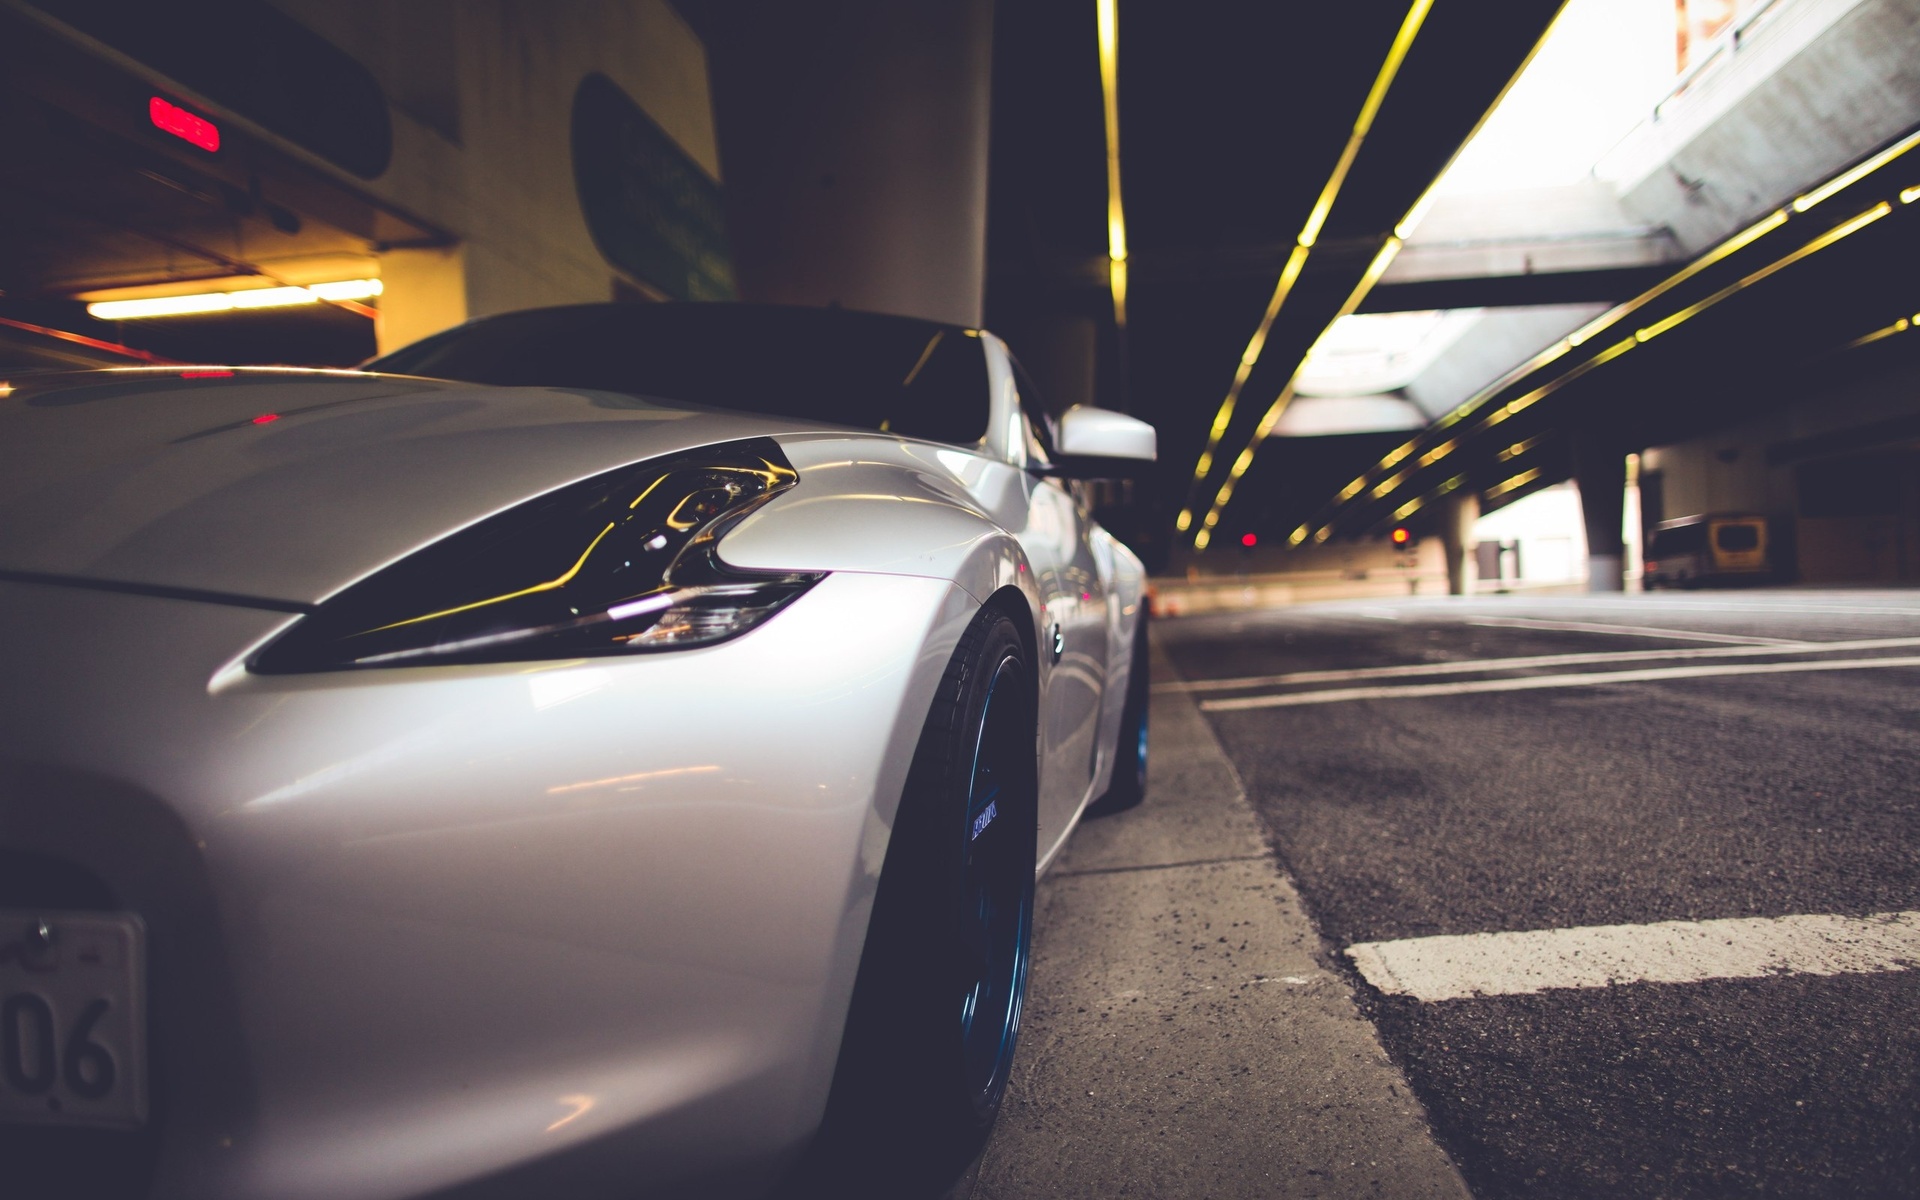 nissan, 350z, Vehicles, Cars, Tuning, Wheels, Rims, Tires, Close, Up, Roads, Street, Tunnel, Architecture, Buildings, Stance, Lights Wallpaper